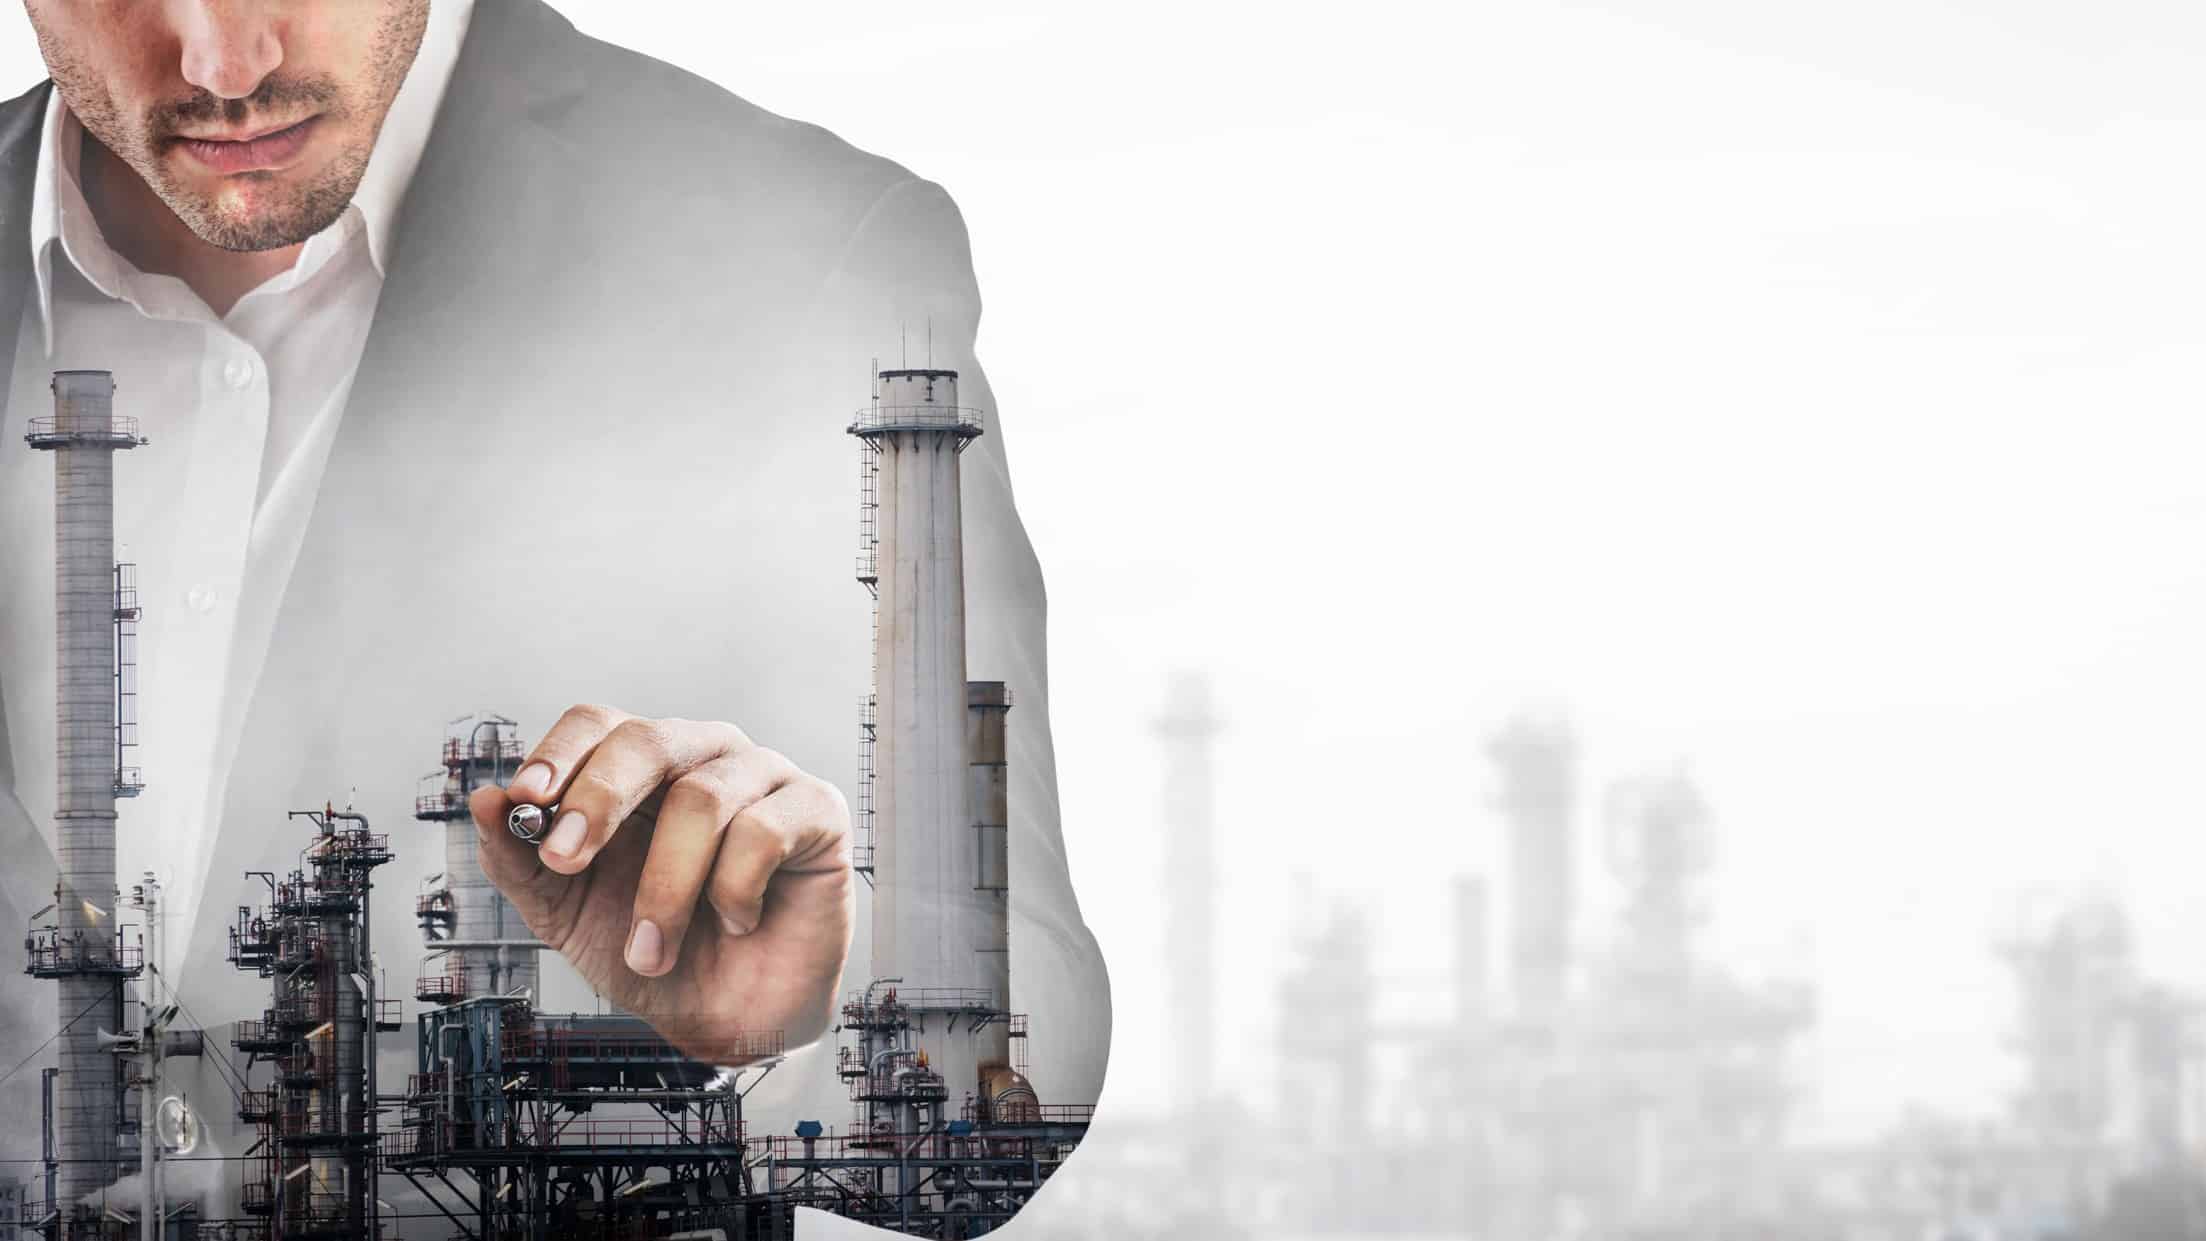 a graphic image of a polluting fossil fuel processing plant superimposed with the image of a businessman holding a pen and signing off on it.